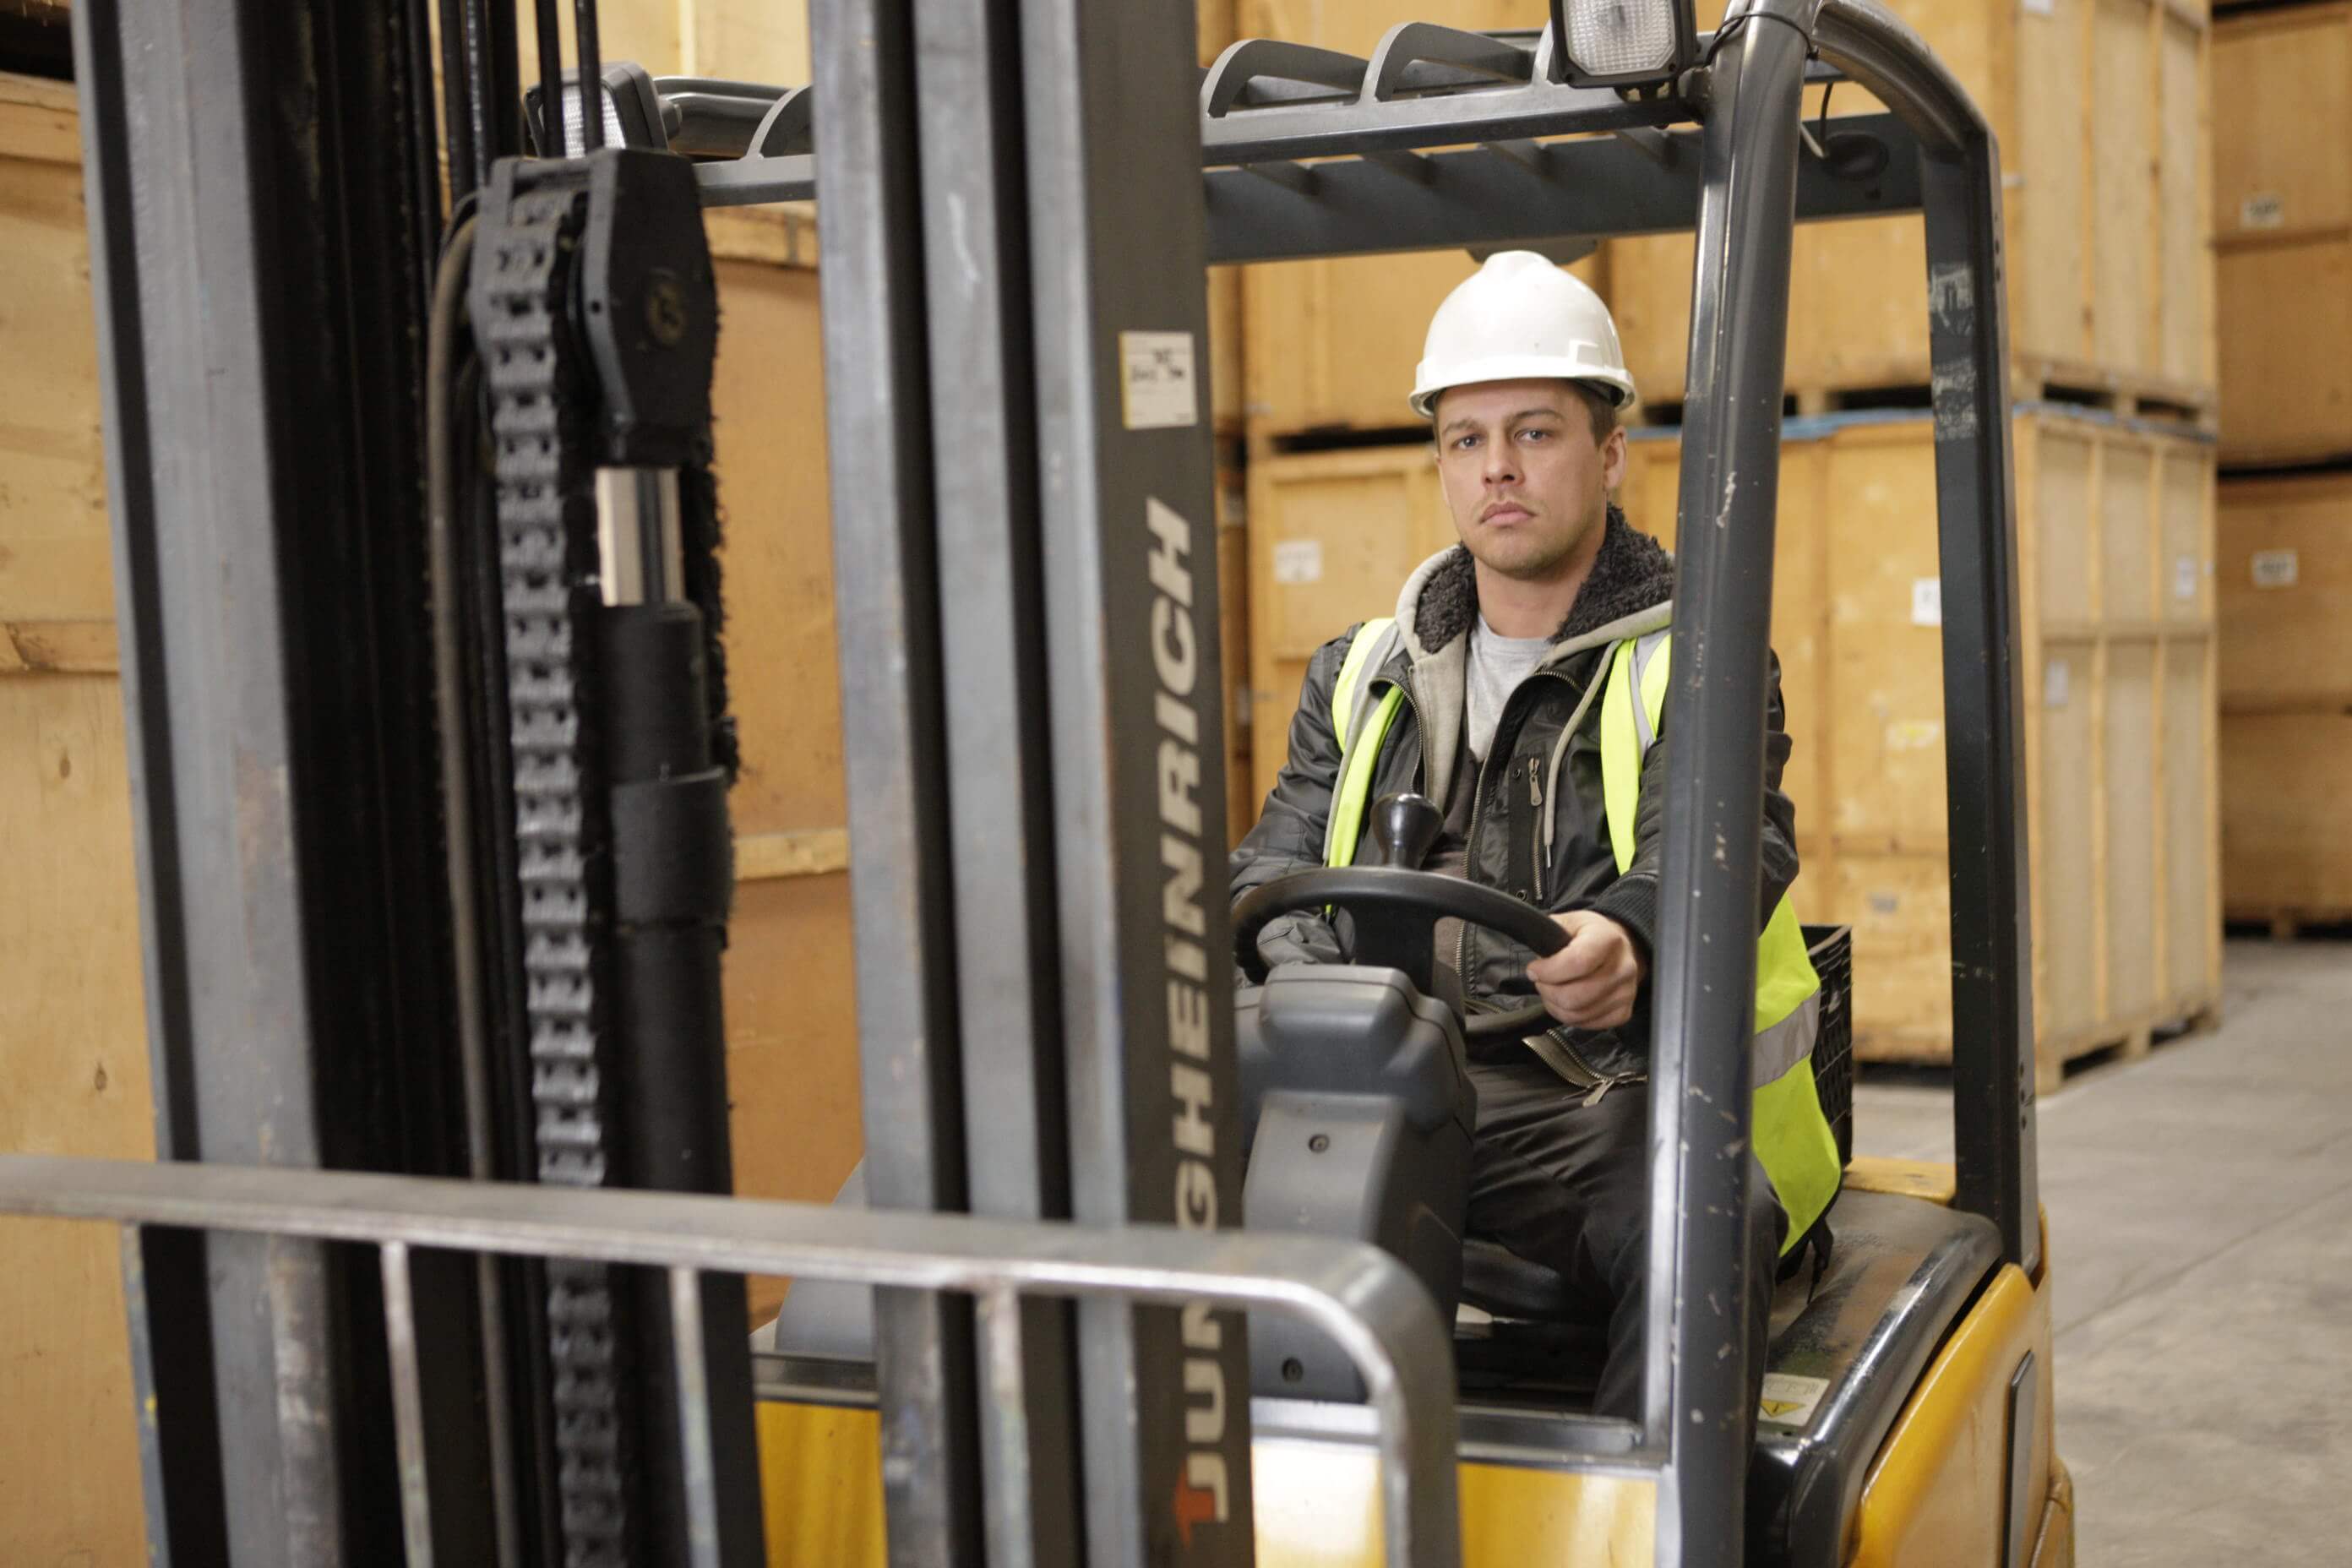 Propane forklift trucks: how safe are they?